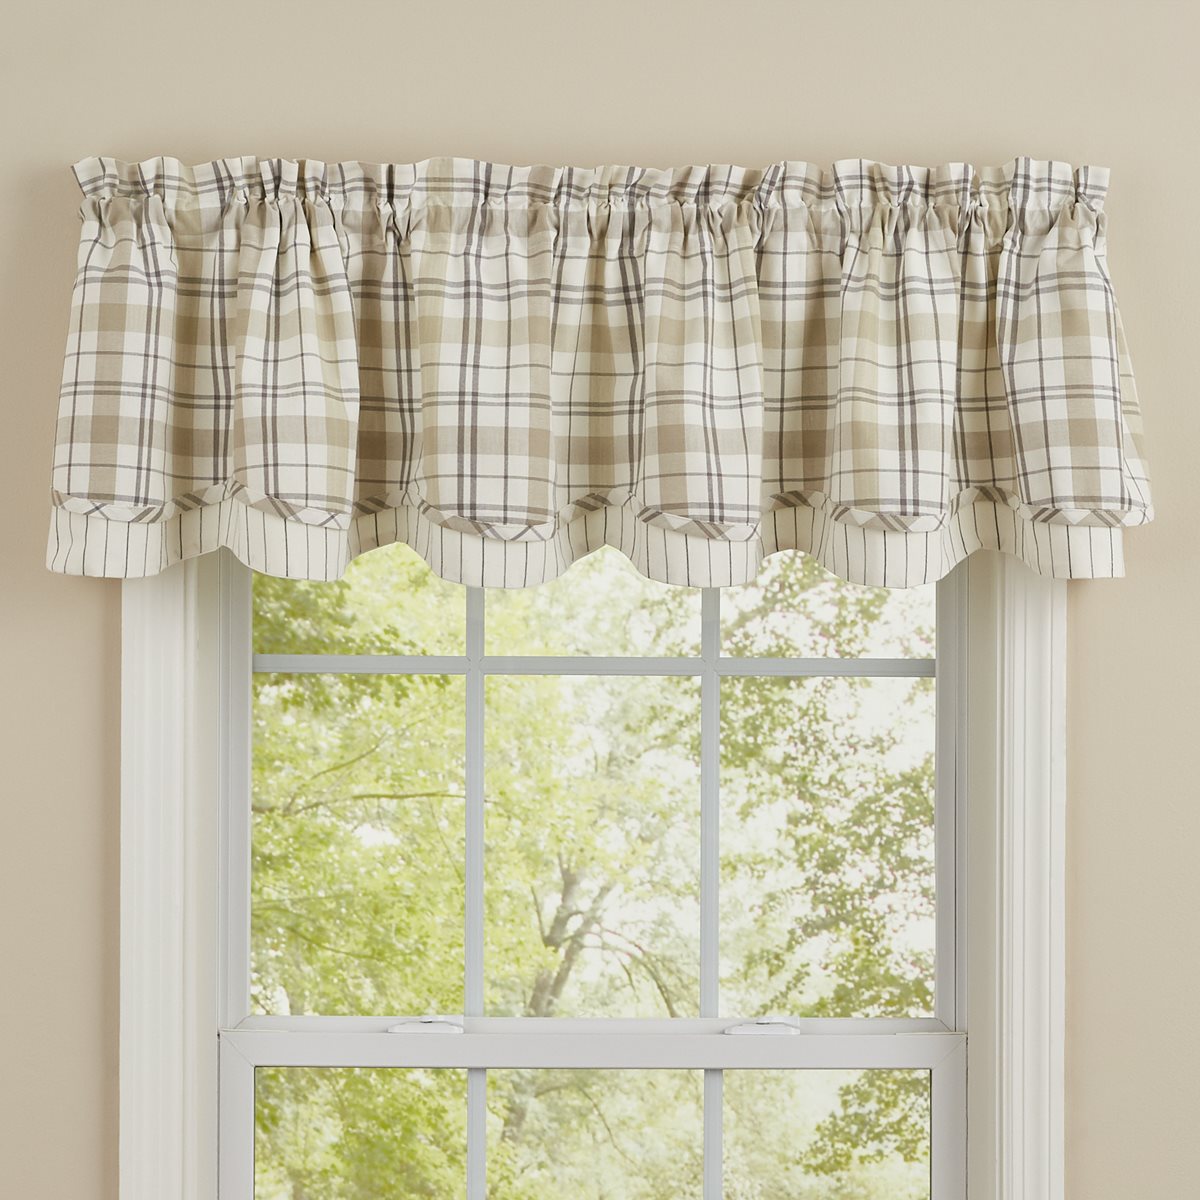 In The Meadow Plaid Lined Layered Valance 72x16 By Park Designs